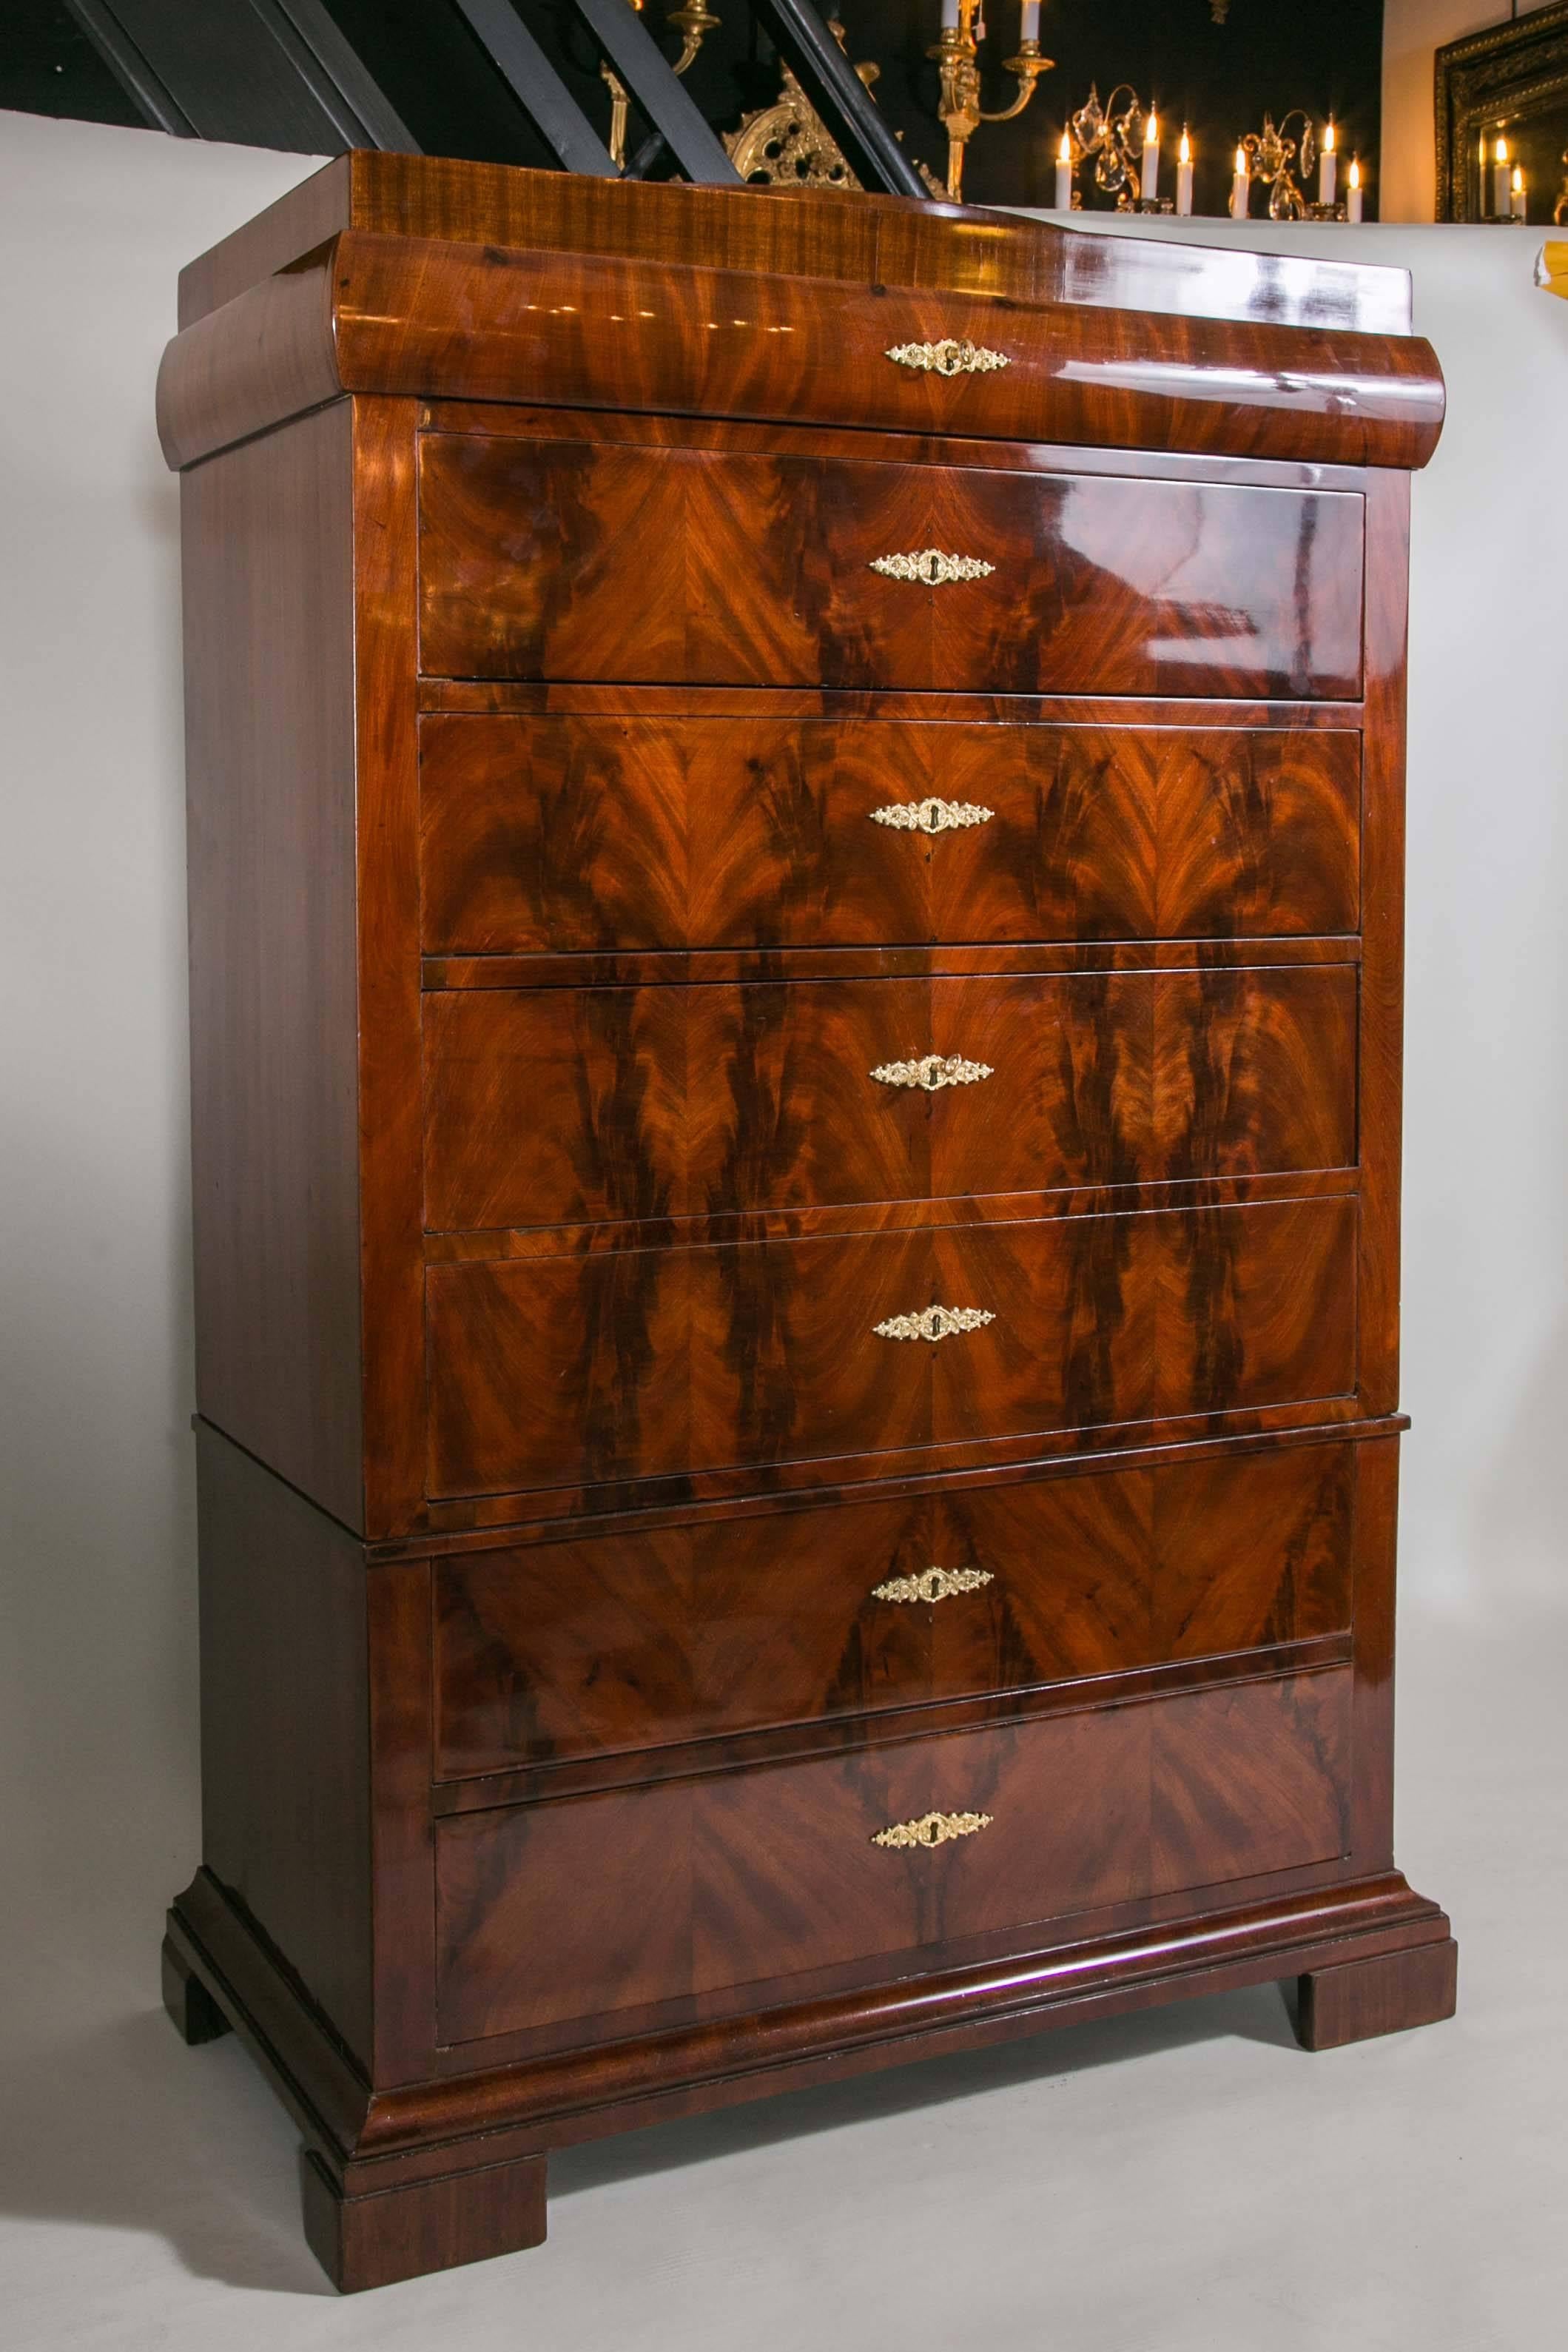 Late 19th century English semainier in mahogany with mahogany veneers with one drawer as a desk.
 